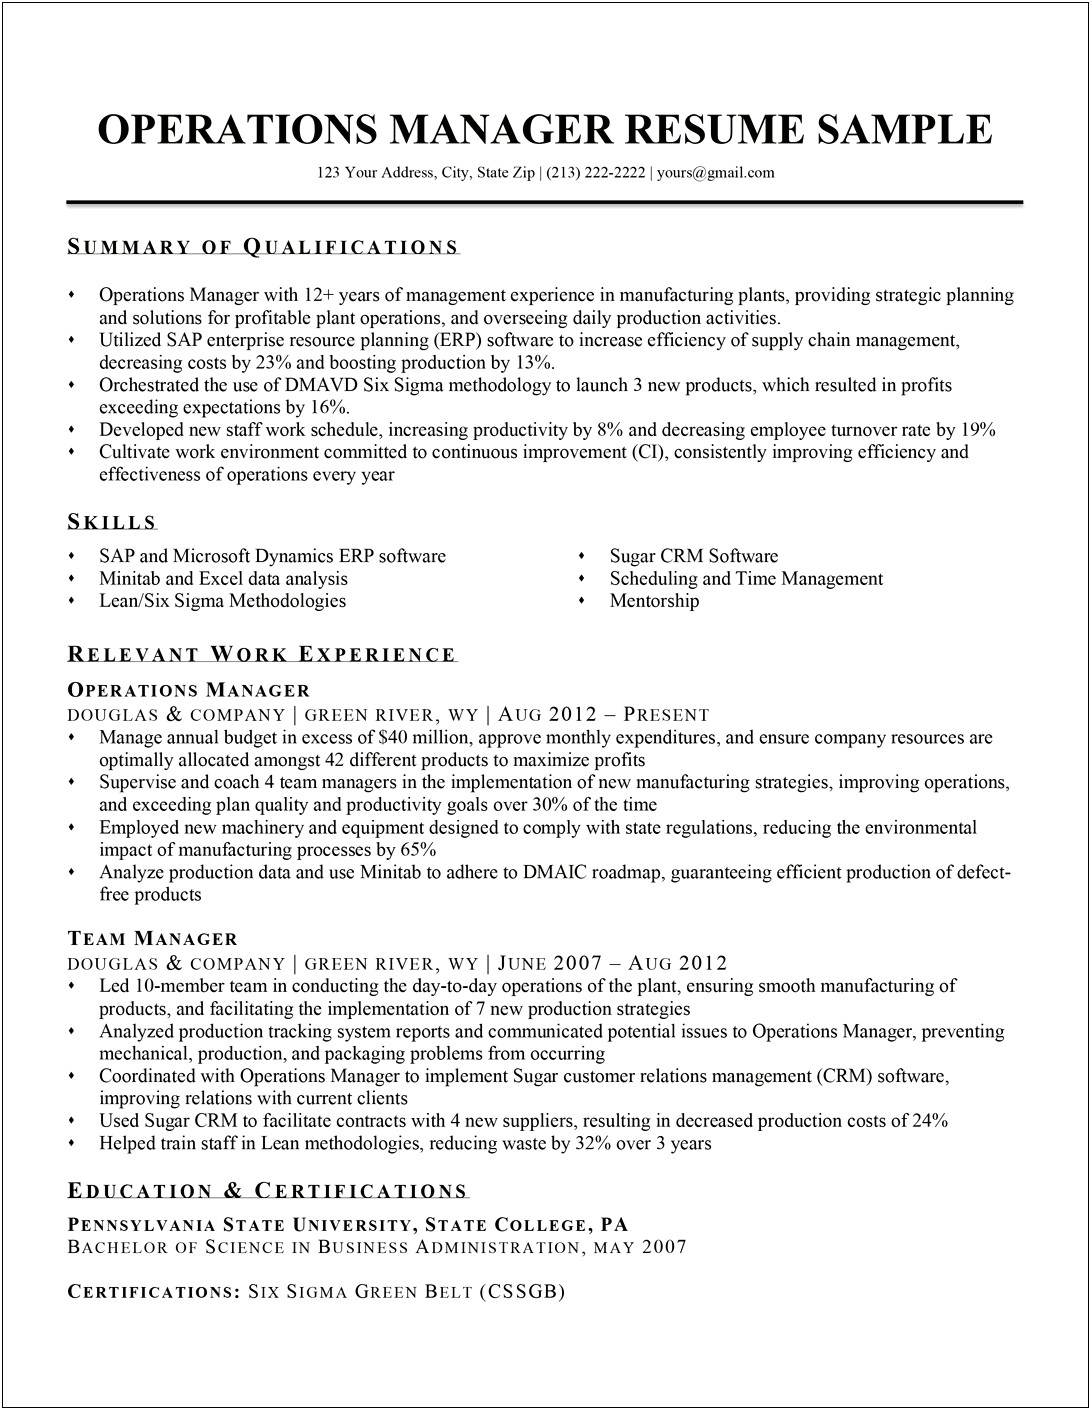 Child Care Manager Resume Examples